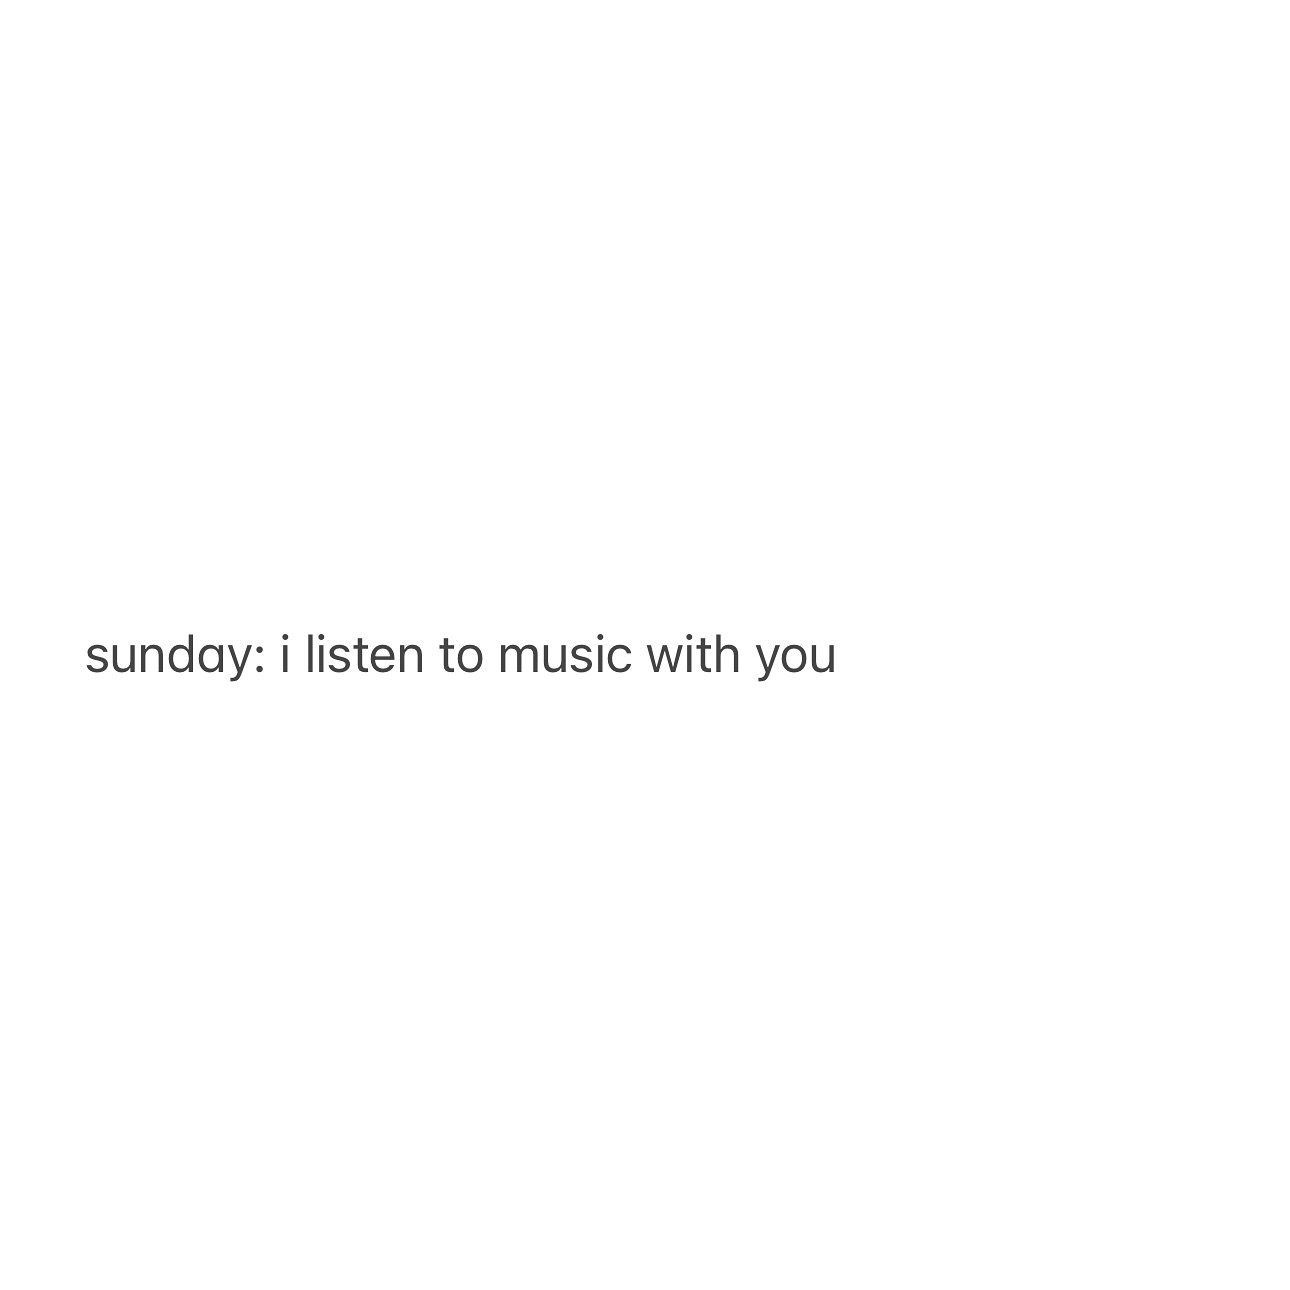 sundays are for listening to music with you, long walks holding your hand, reading together on the couch and drinking more coffee than we should